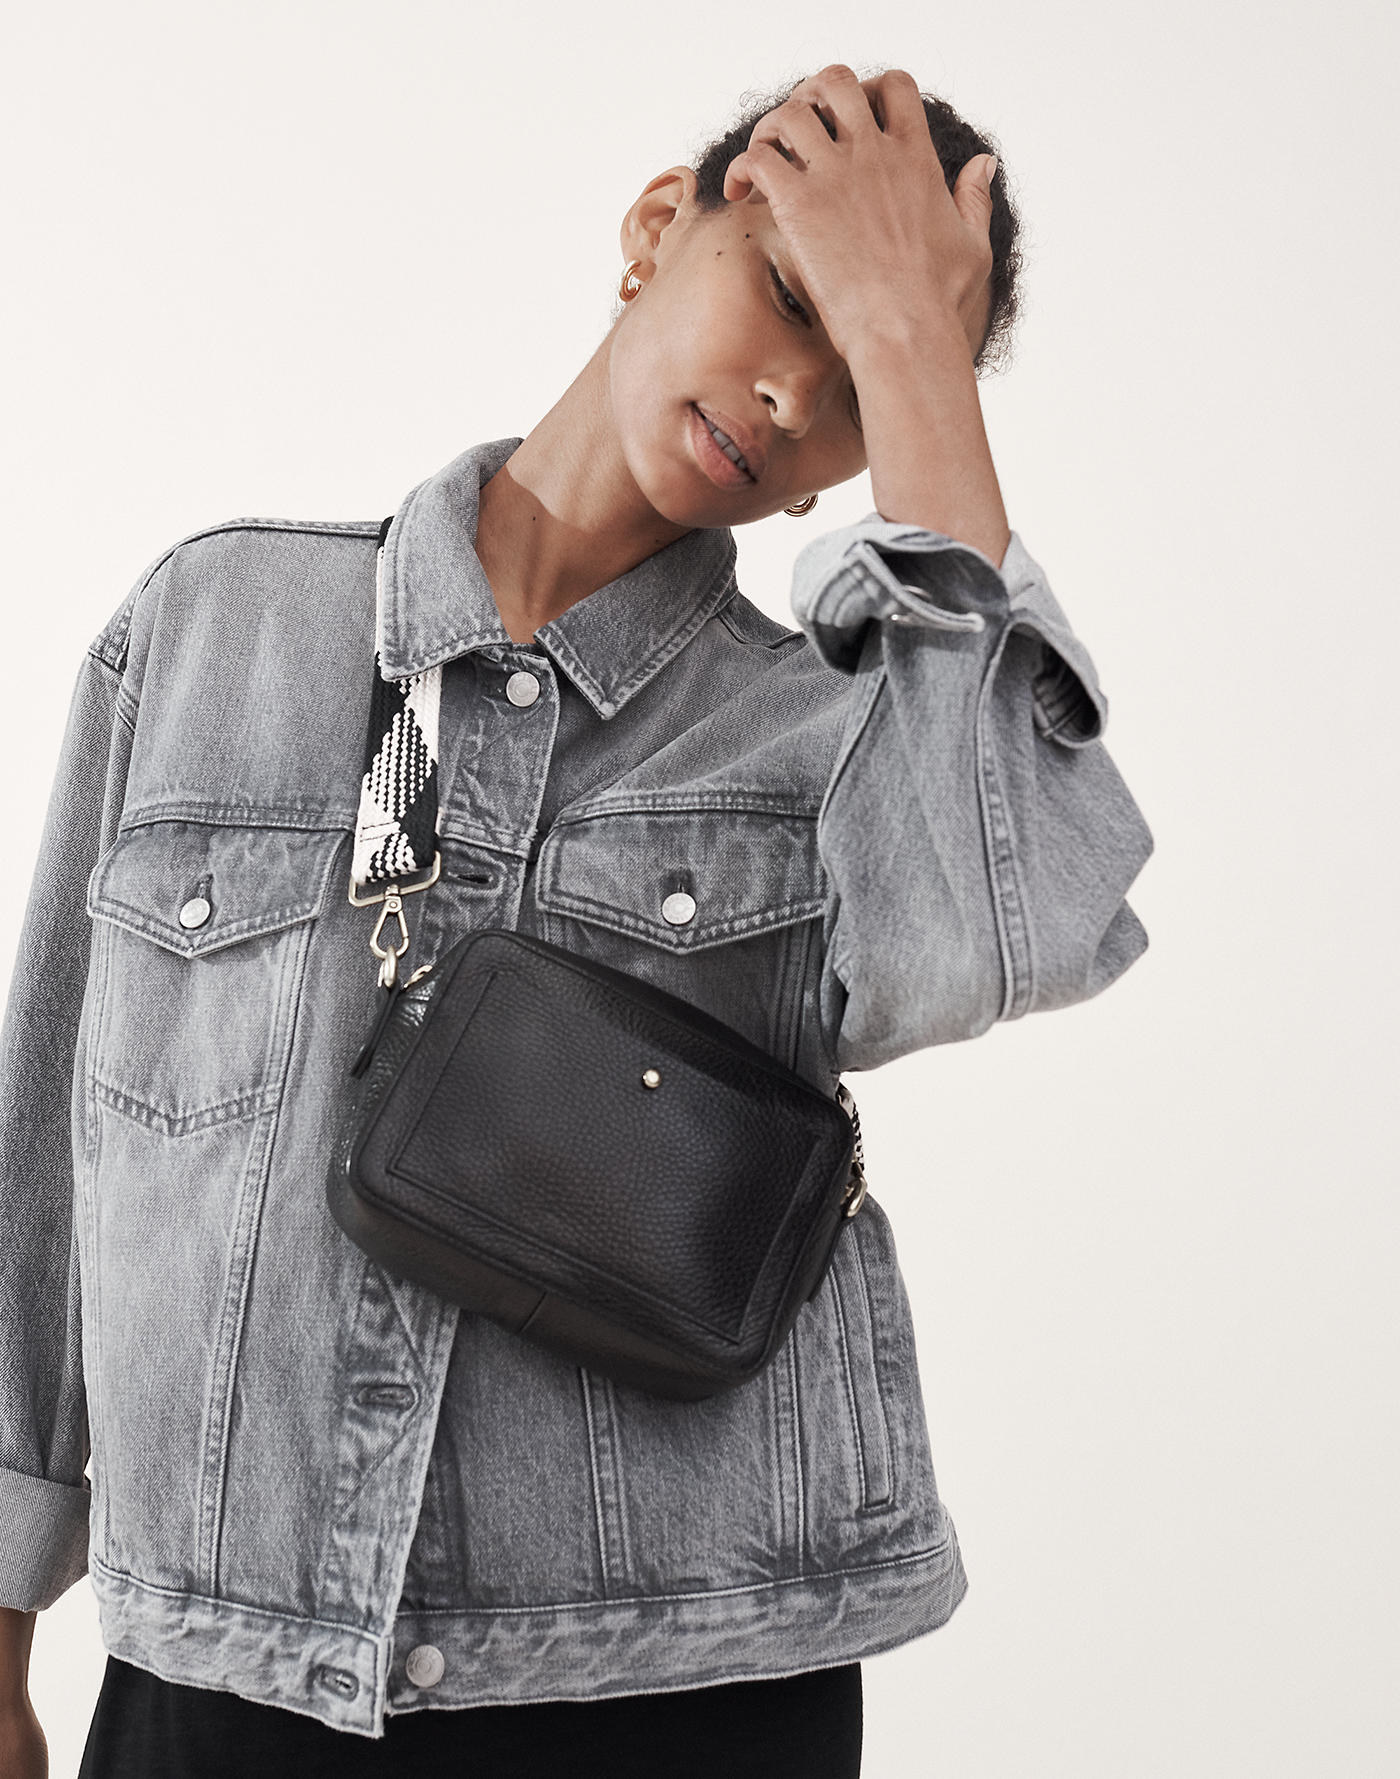 model with the rectangle bag with front pocket across their body with black and white patterned strap